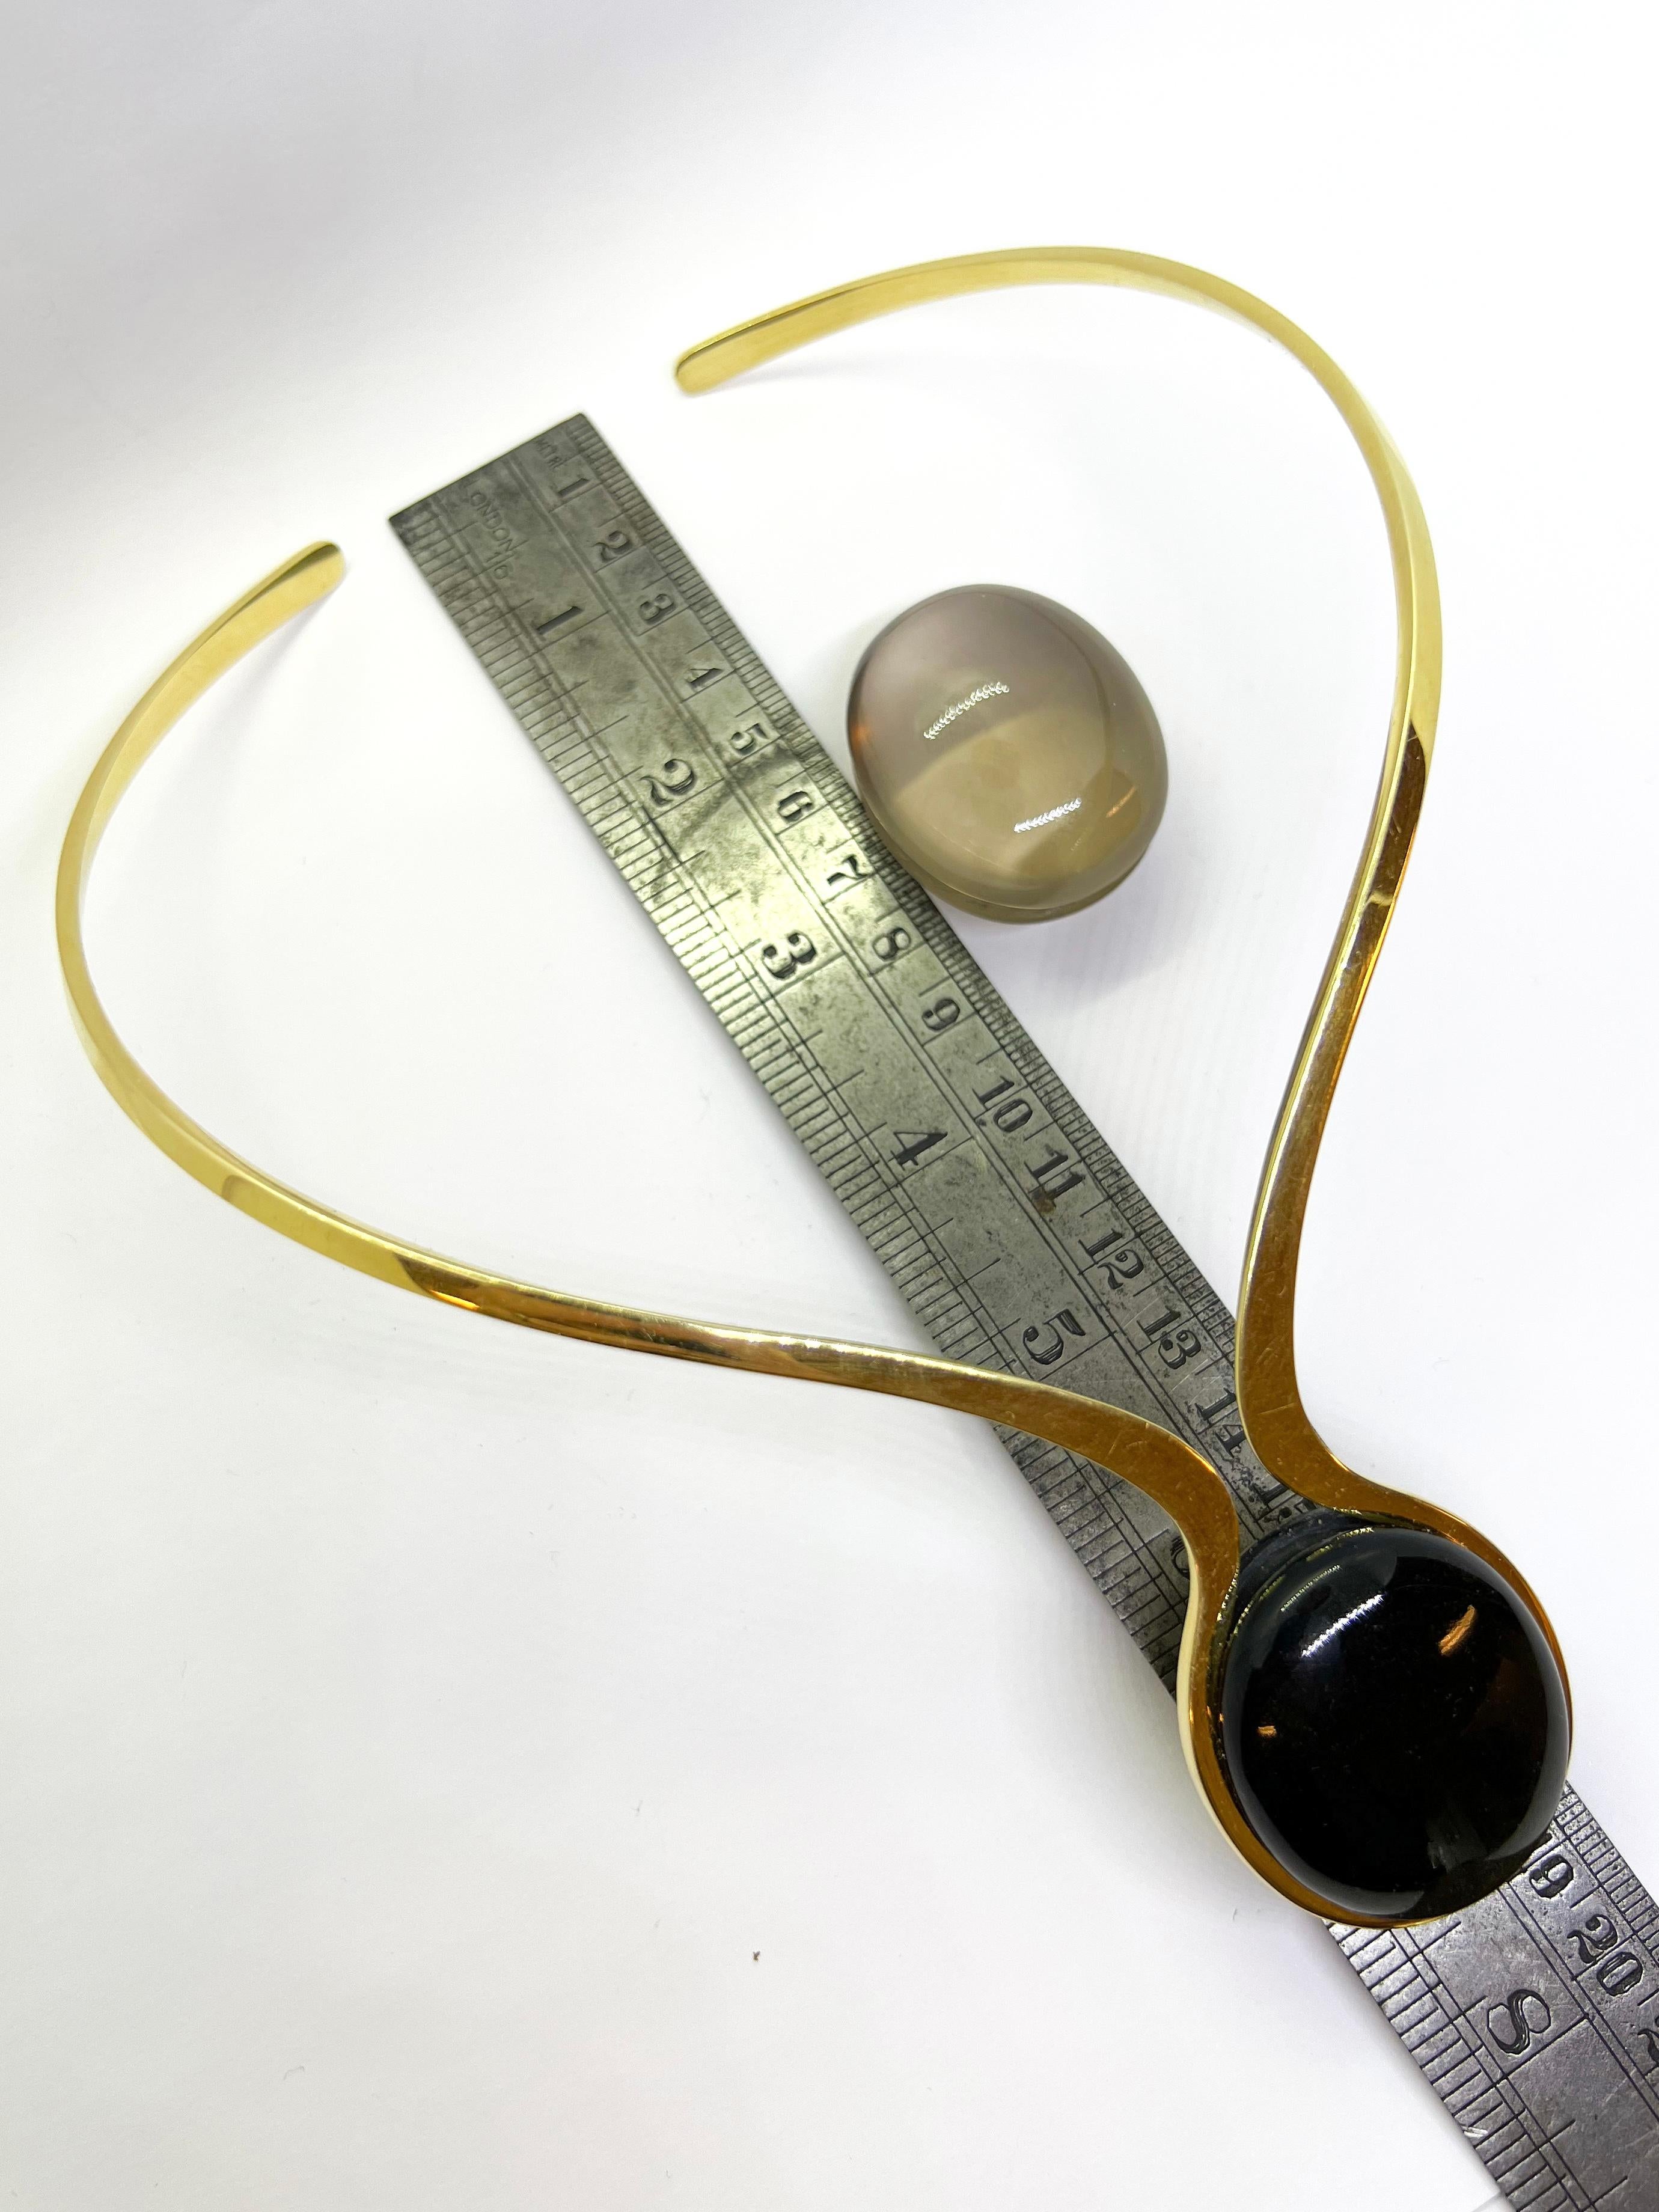 .13 on a tape measure